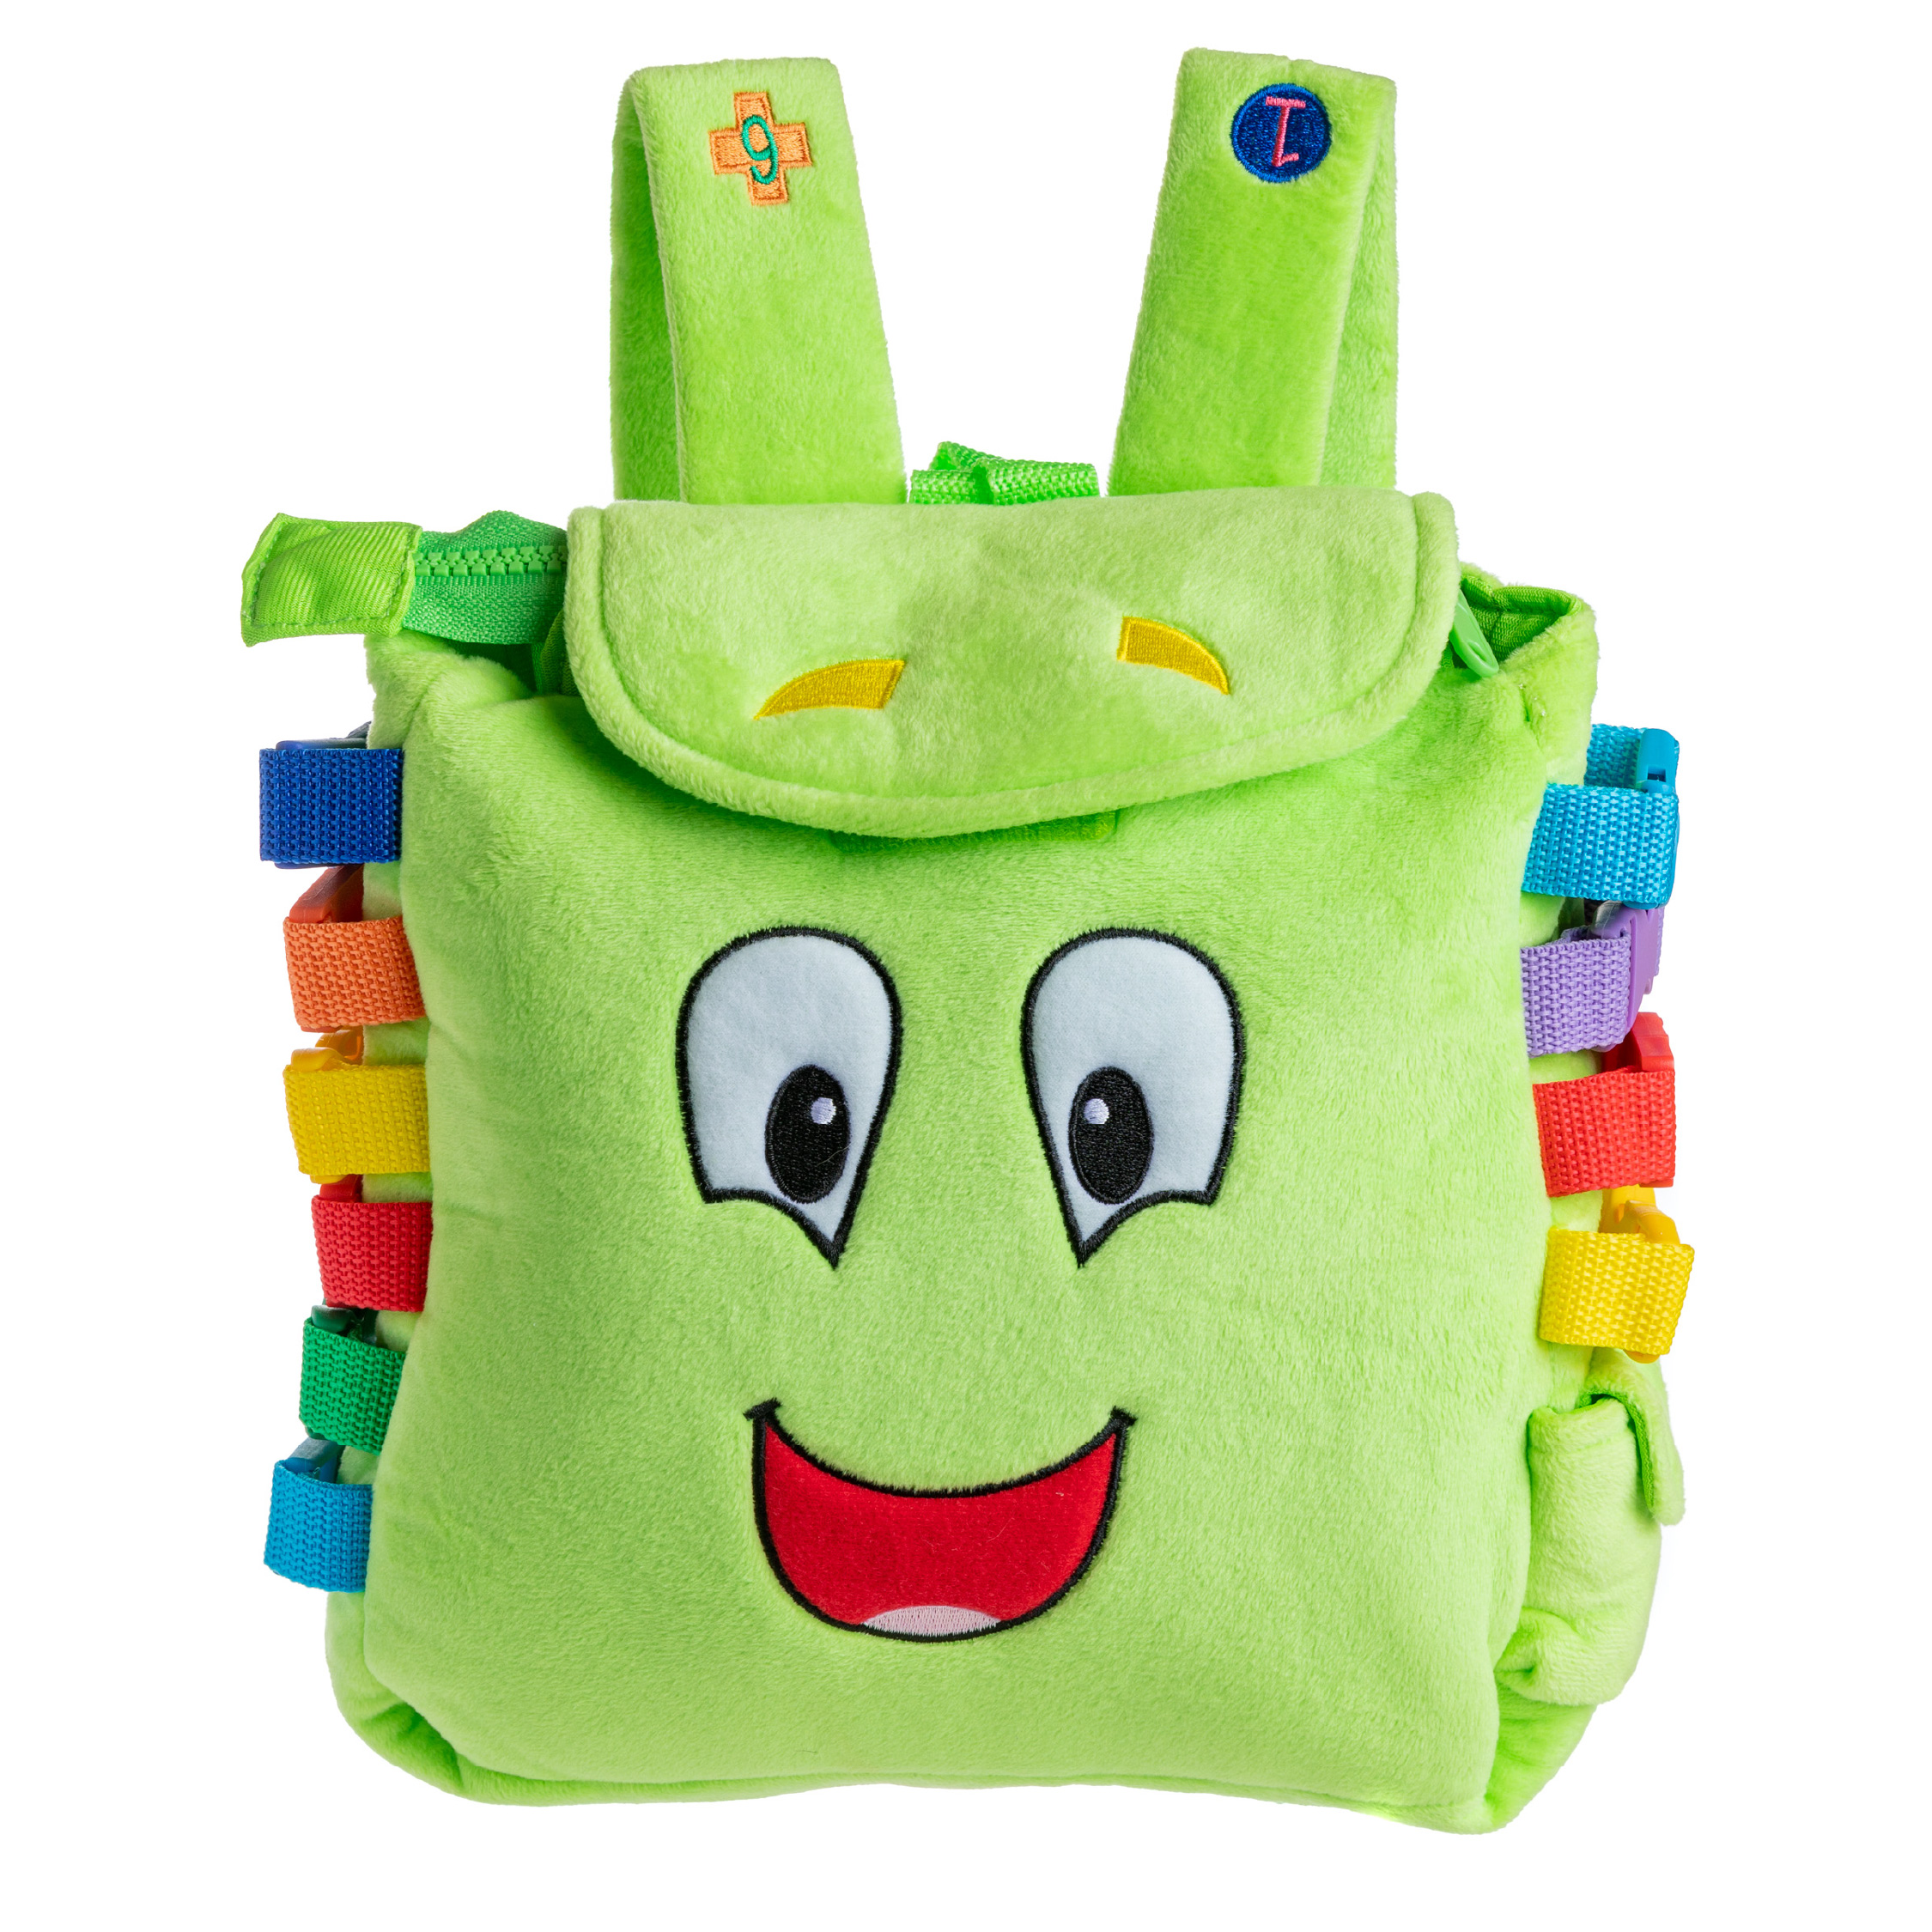 Buckle Toy - Buddy Activity Backpack - Educational Pre-K Learning Activity Toy - Zippered Pouch for Storage - Great Gift for Toddlers and Kids - image 1 of 6